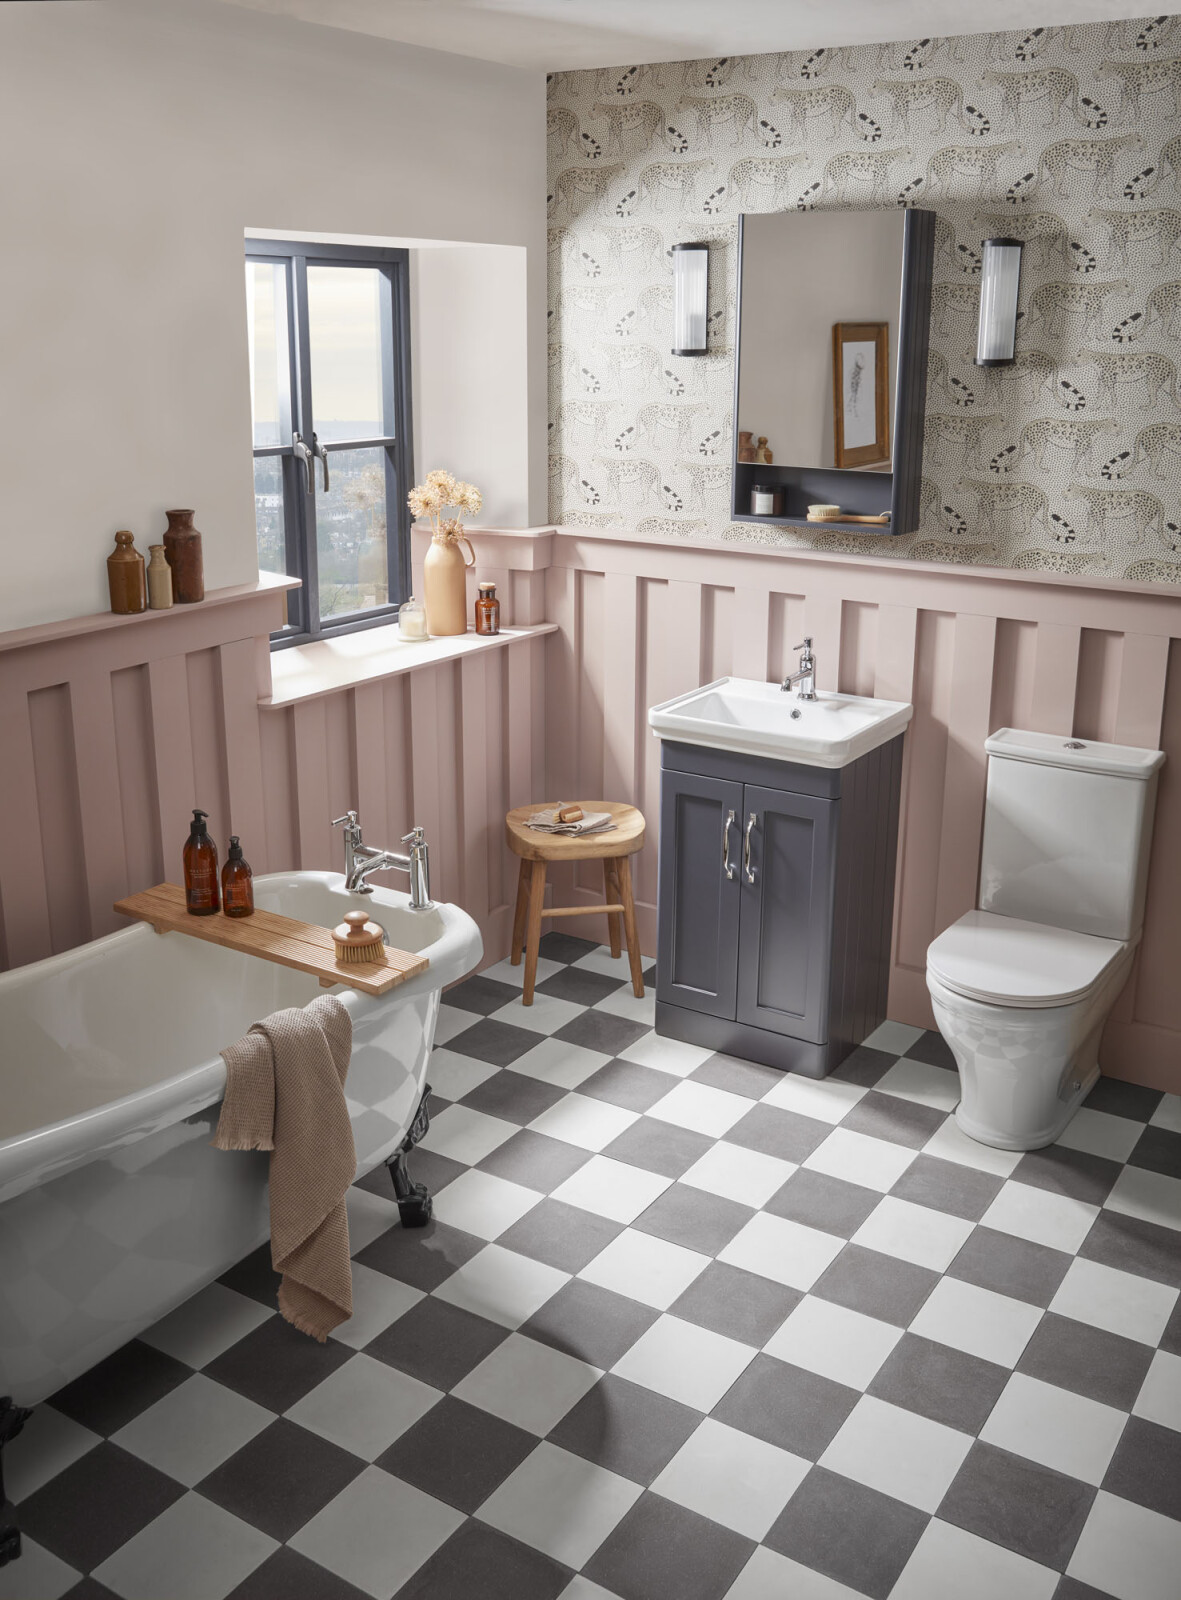 Product Lifestyle image of the Roper Rhodes Tavistock Marston Traditional 500mm Bathroom Vanity in Dark Grey in Chequerboard Tiled Bathroom